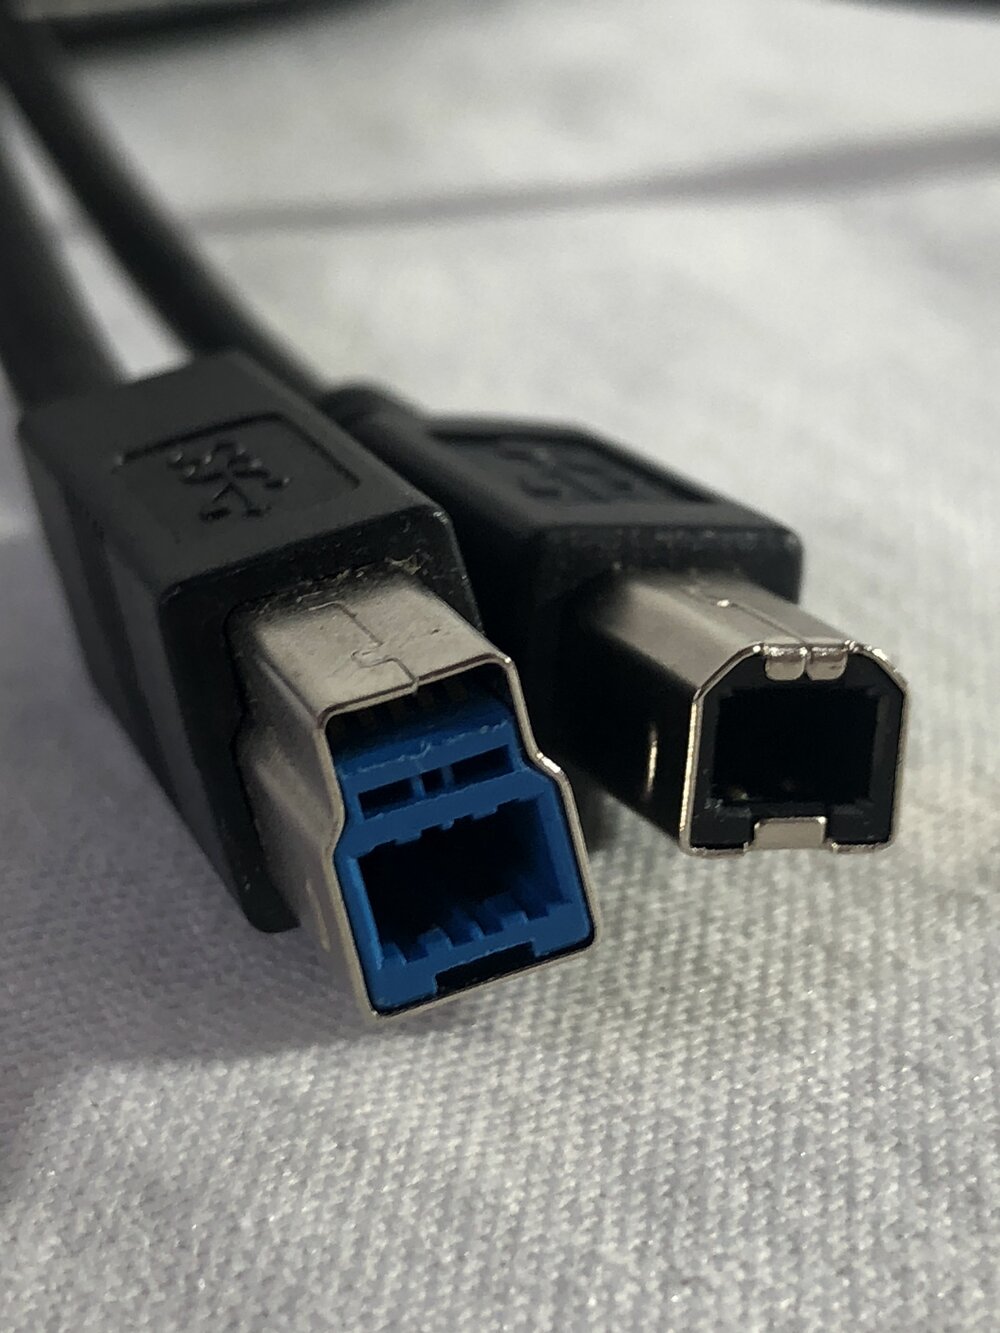 motor Zeeslak Op tijd USB-A to USB-B Cable (2.0 or 3.0 Available) — Free Geek Twin Cities